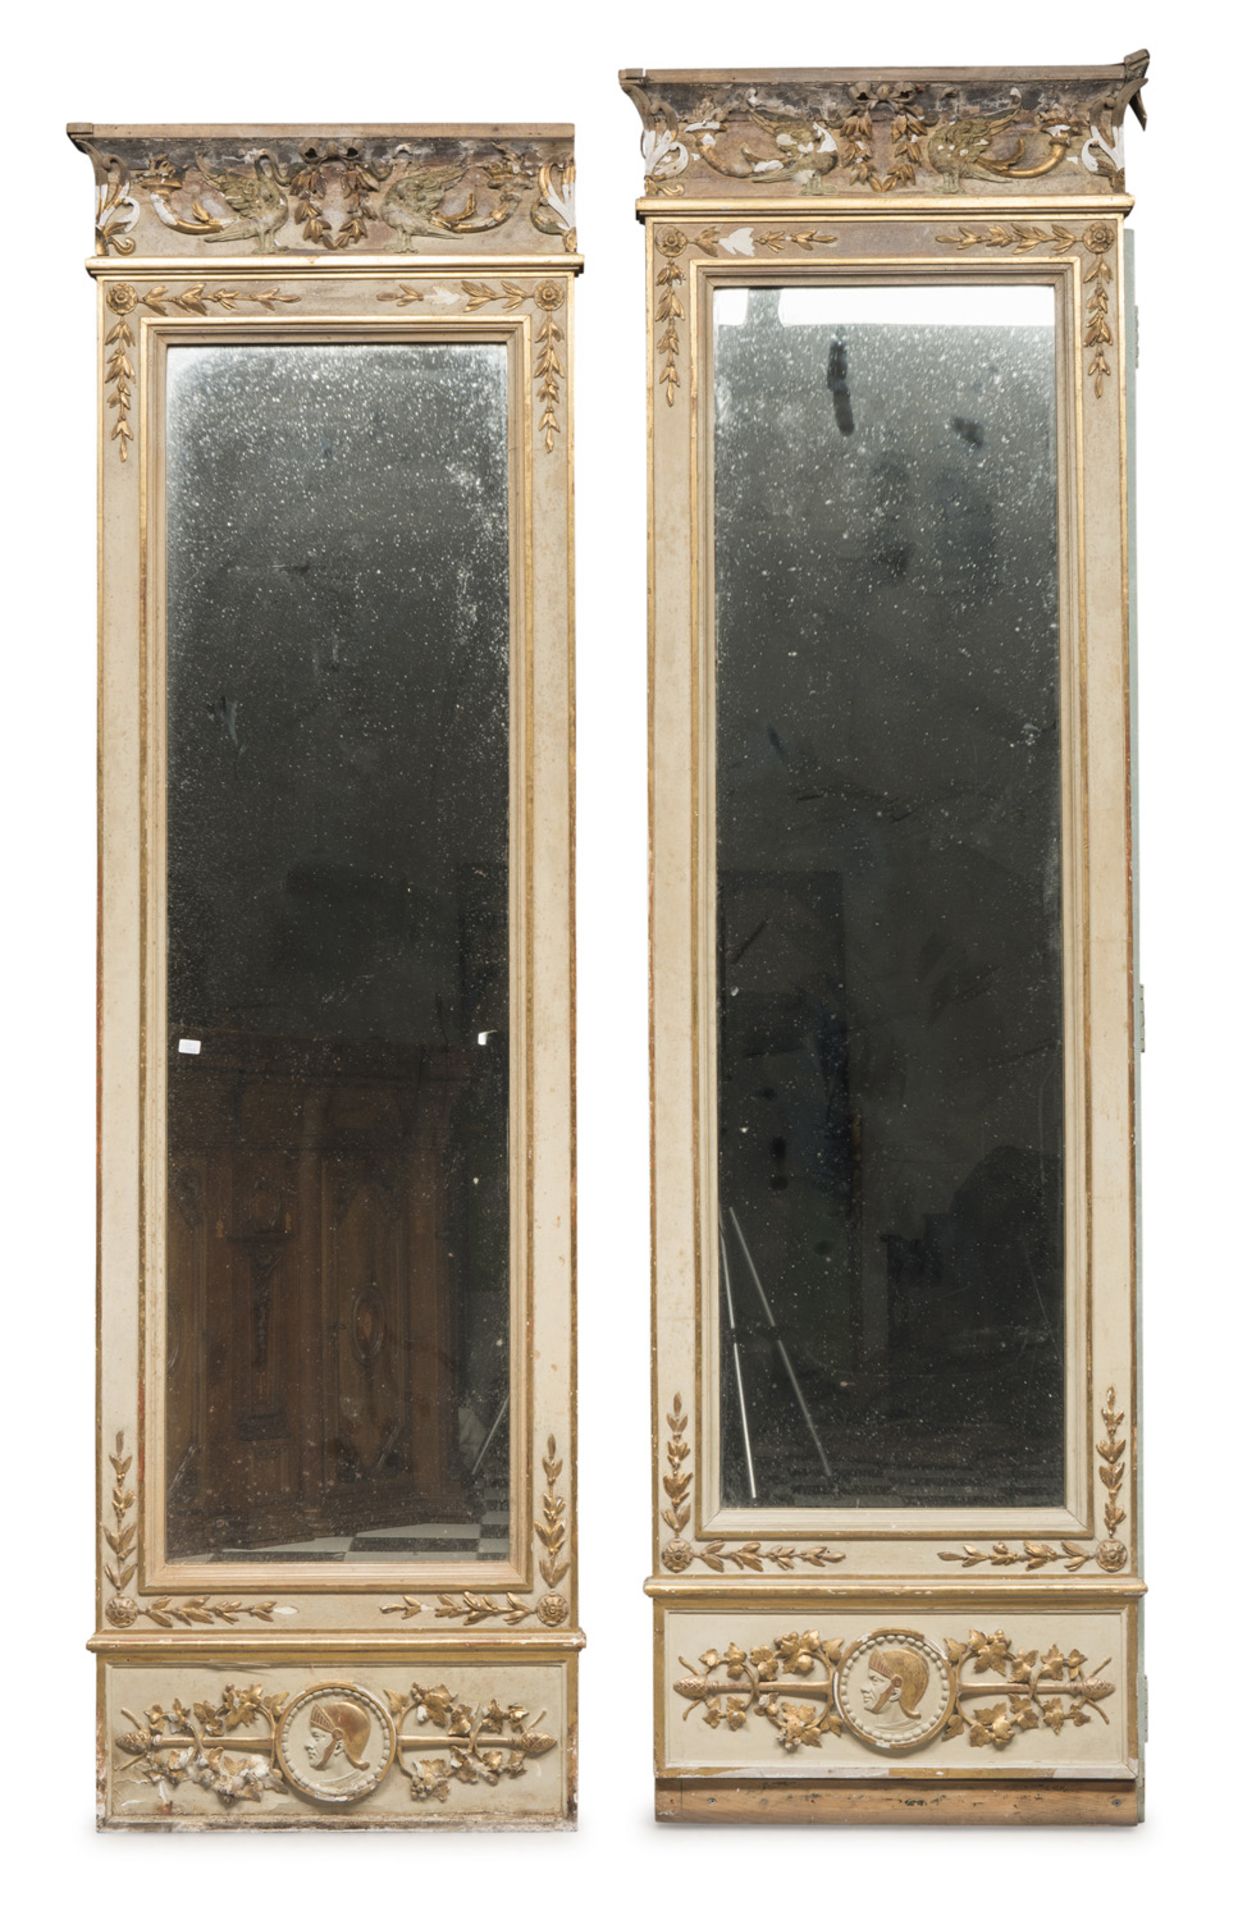 BEAUTIFUL PAIR OF MIRRORS IN LACQUERED WOOD, PROBABLY NAPLES, 19TH CENTURY white and gold ground,